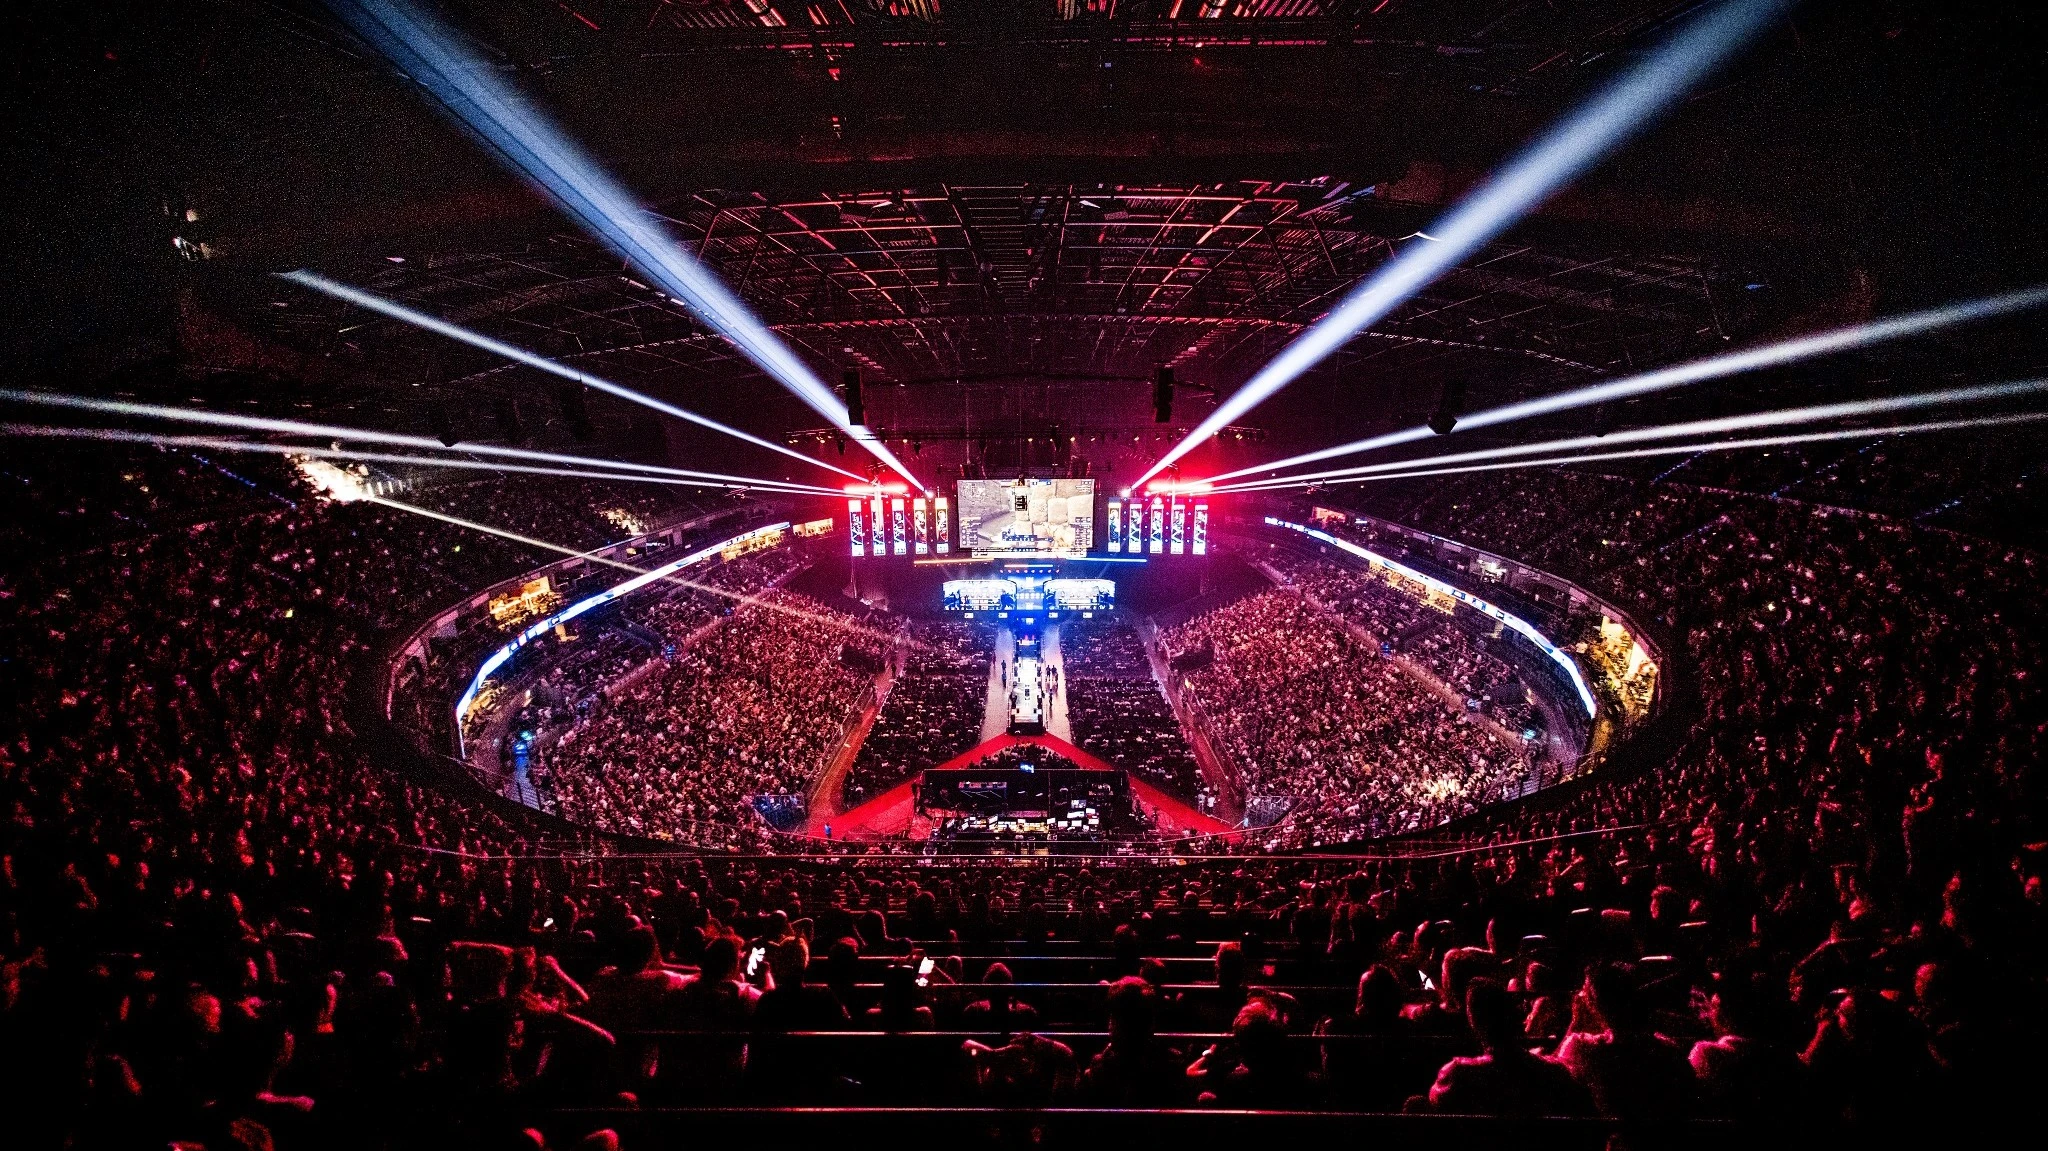 The image shows how packed of CS:GO fans the LANXESS Arena in Cologne, Germany was during the IEM Cologne 2022 playoffs.